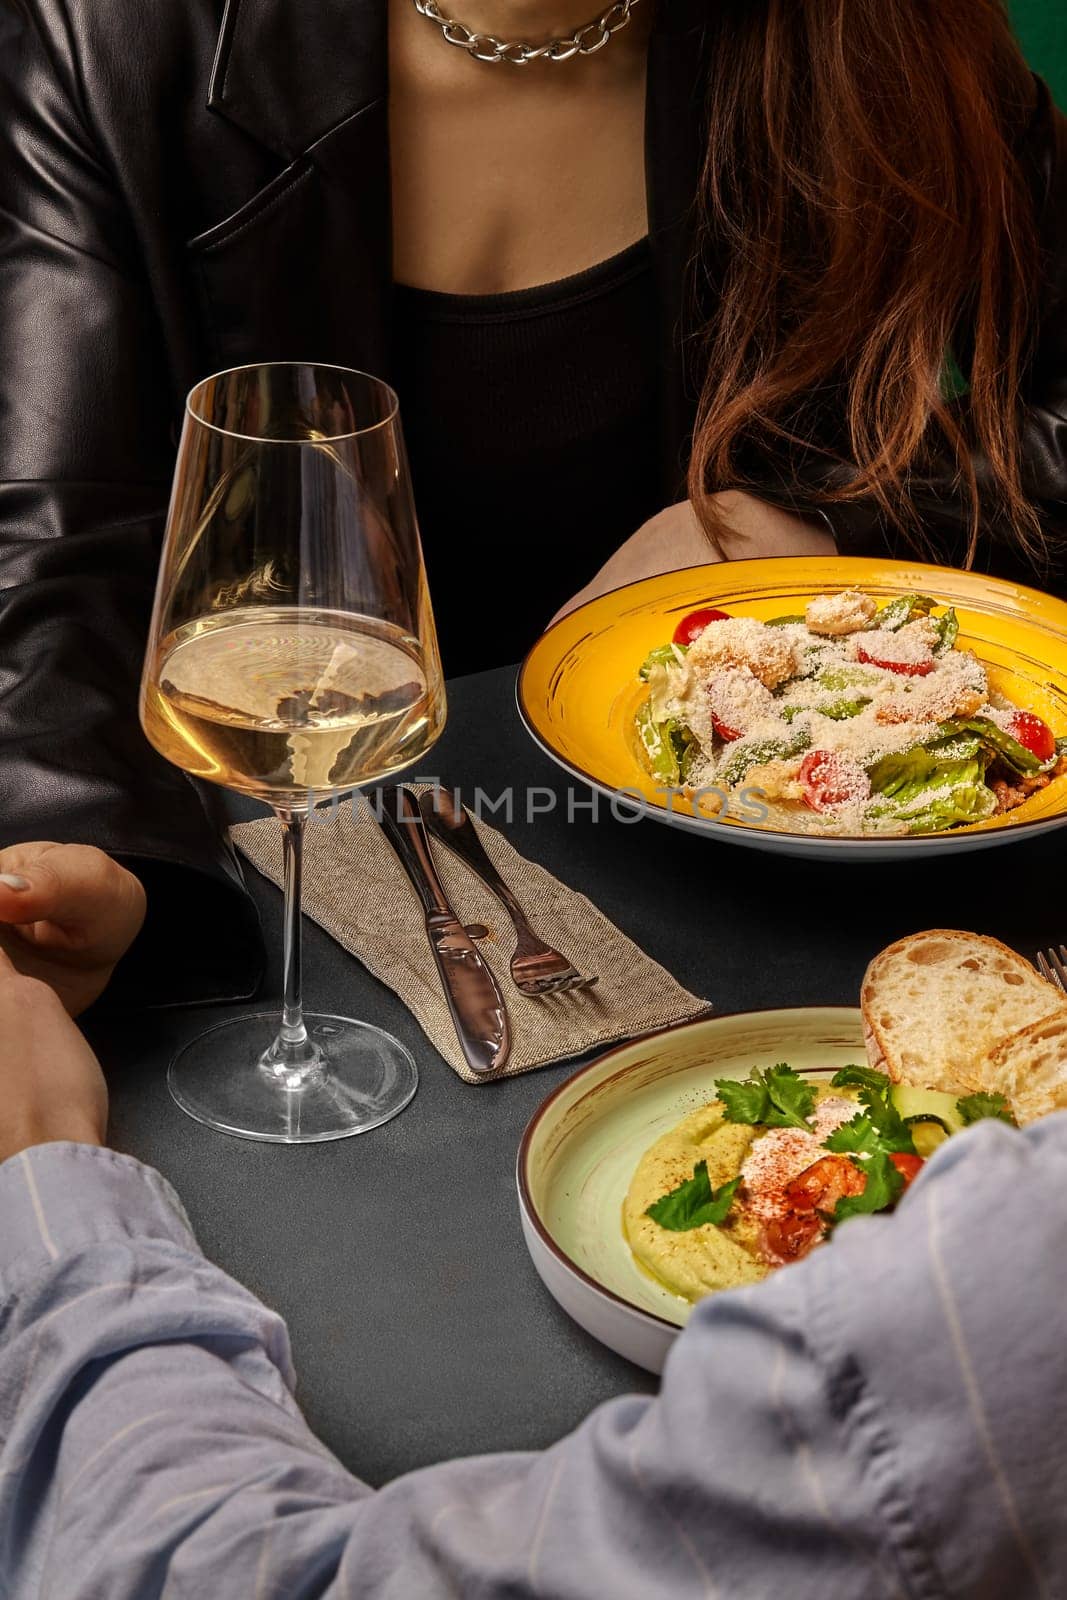 Elegant couple sharing moment over gourmet Caesar salad and creamy hummus with shrimps and greens, accompanied by glass of white wine, in stylish romantic dining setting